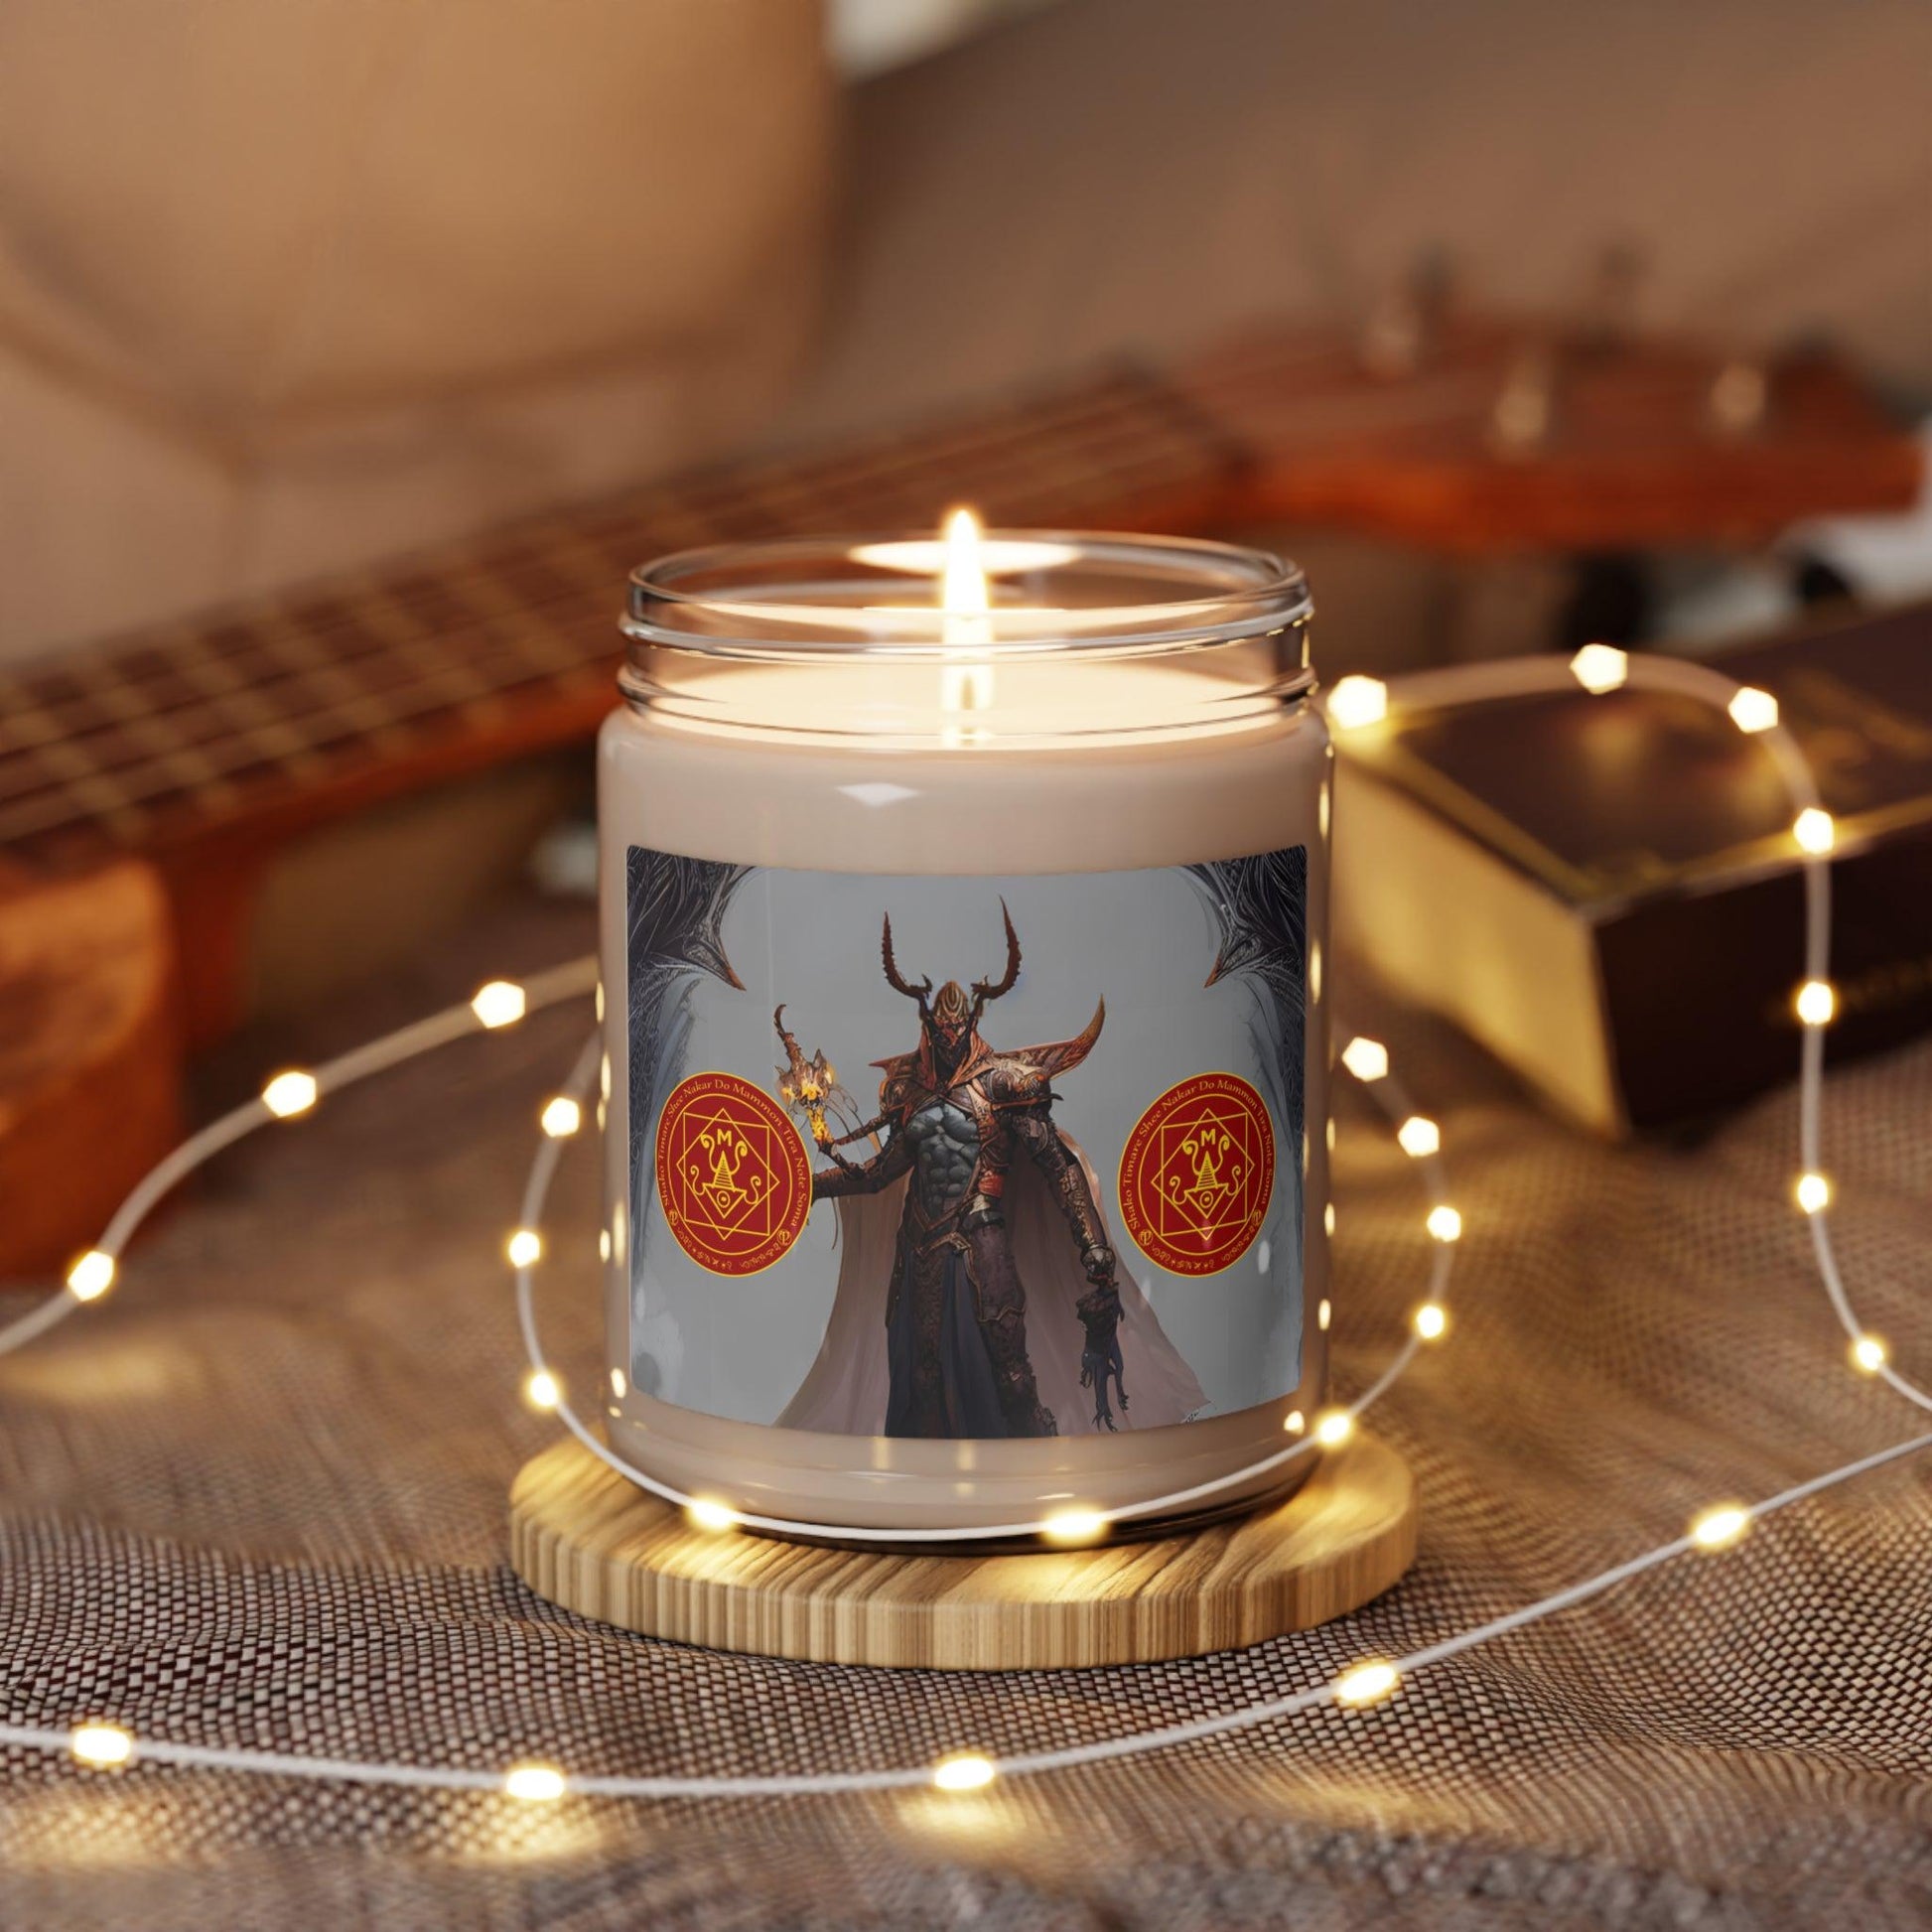 Demon-Mammon-Altar-Scented-Soy-Candle-for-Money-related-offerings-rituals-initiations-or-praying-and-meditation-23